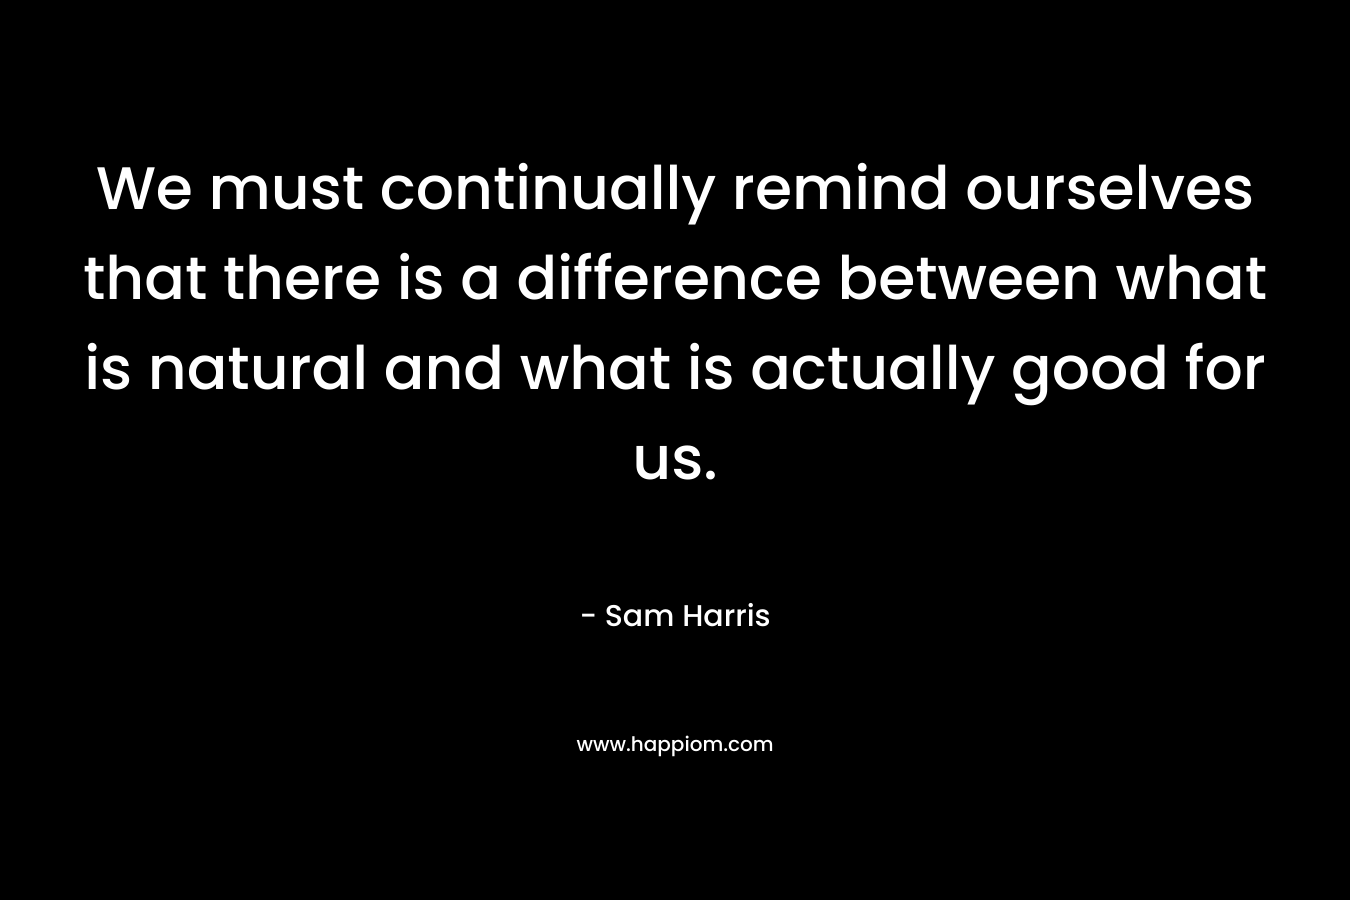 We must continually remind ourselves that there is a difference between what is natural and what is actually good for us. – Sam Harris